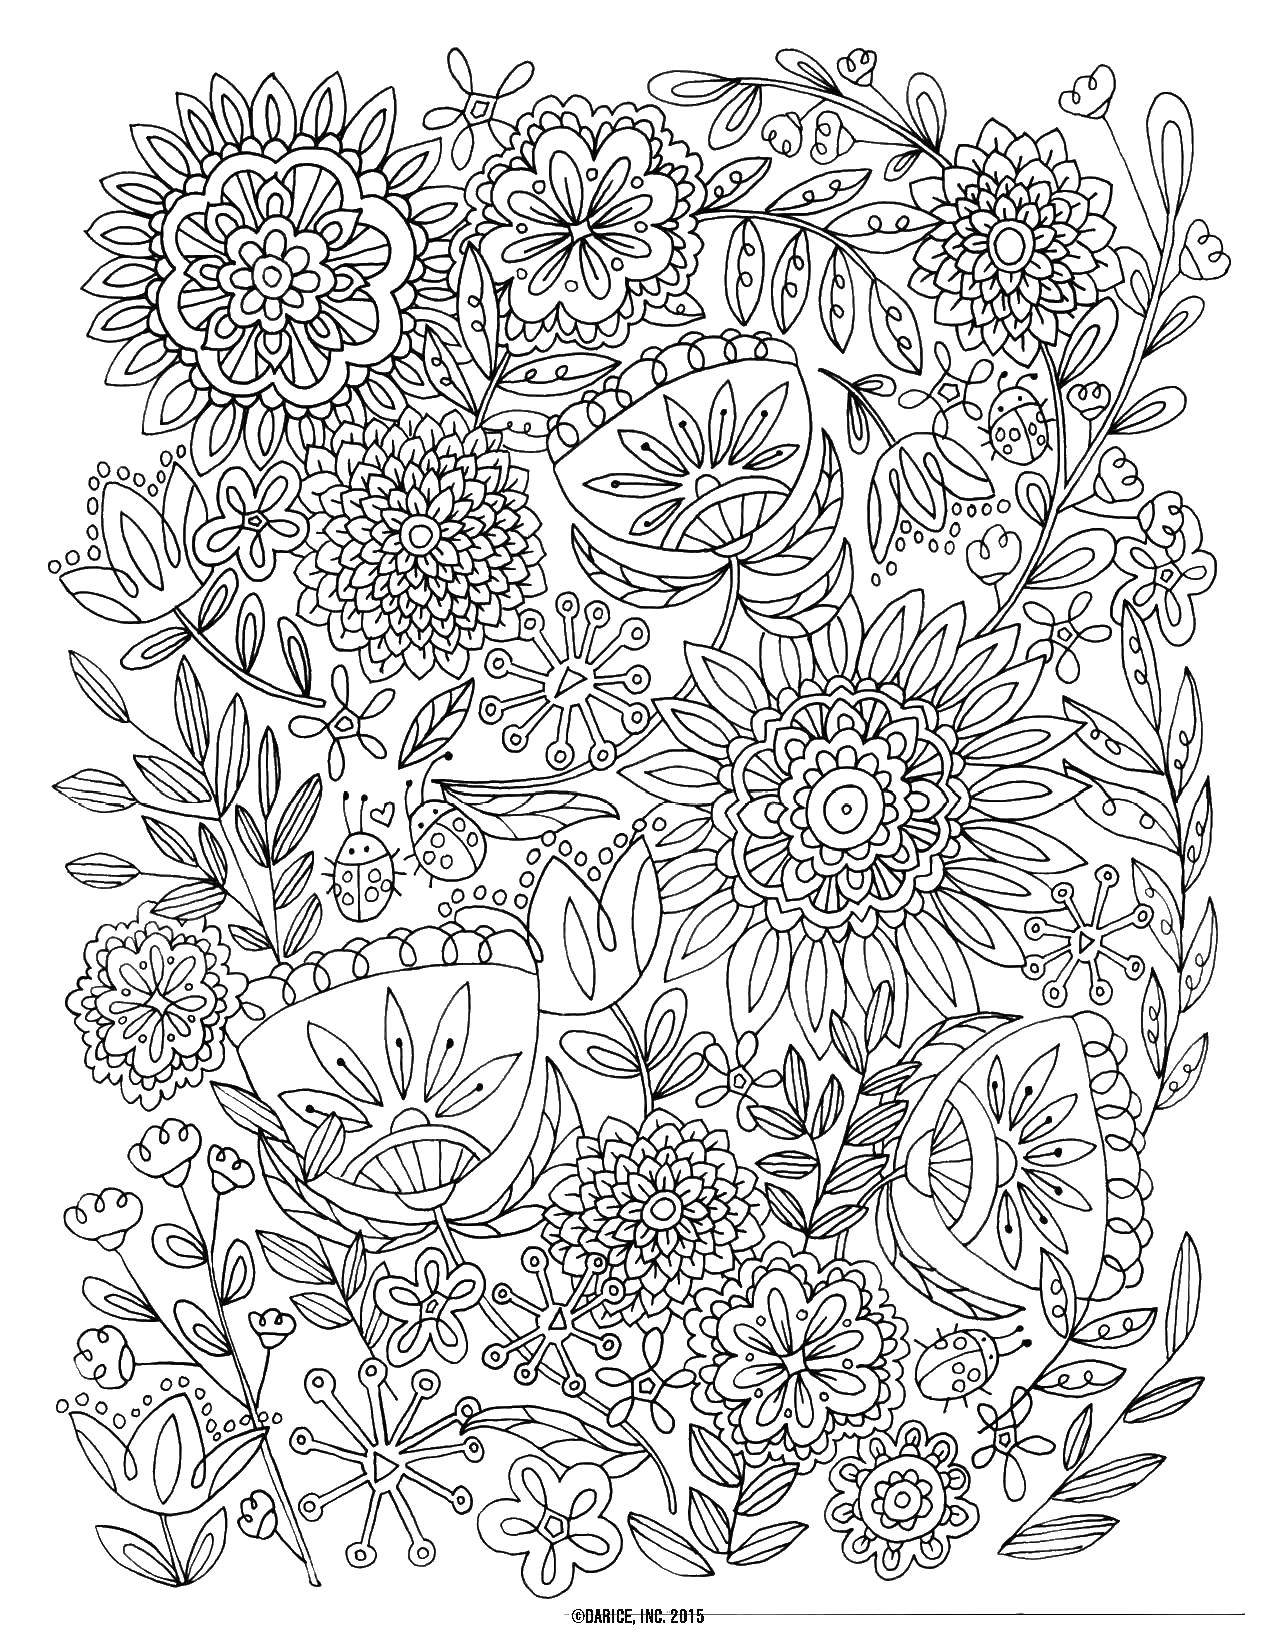 Coloring Colors. Category Patterns with flowers. Tags:  flowers, patterns.